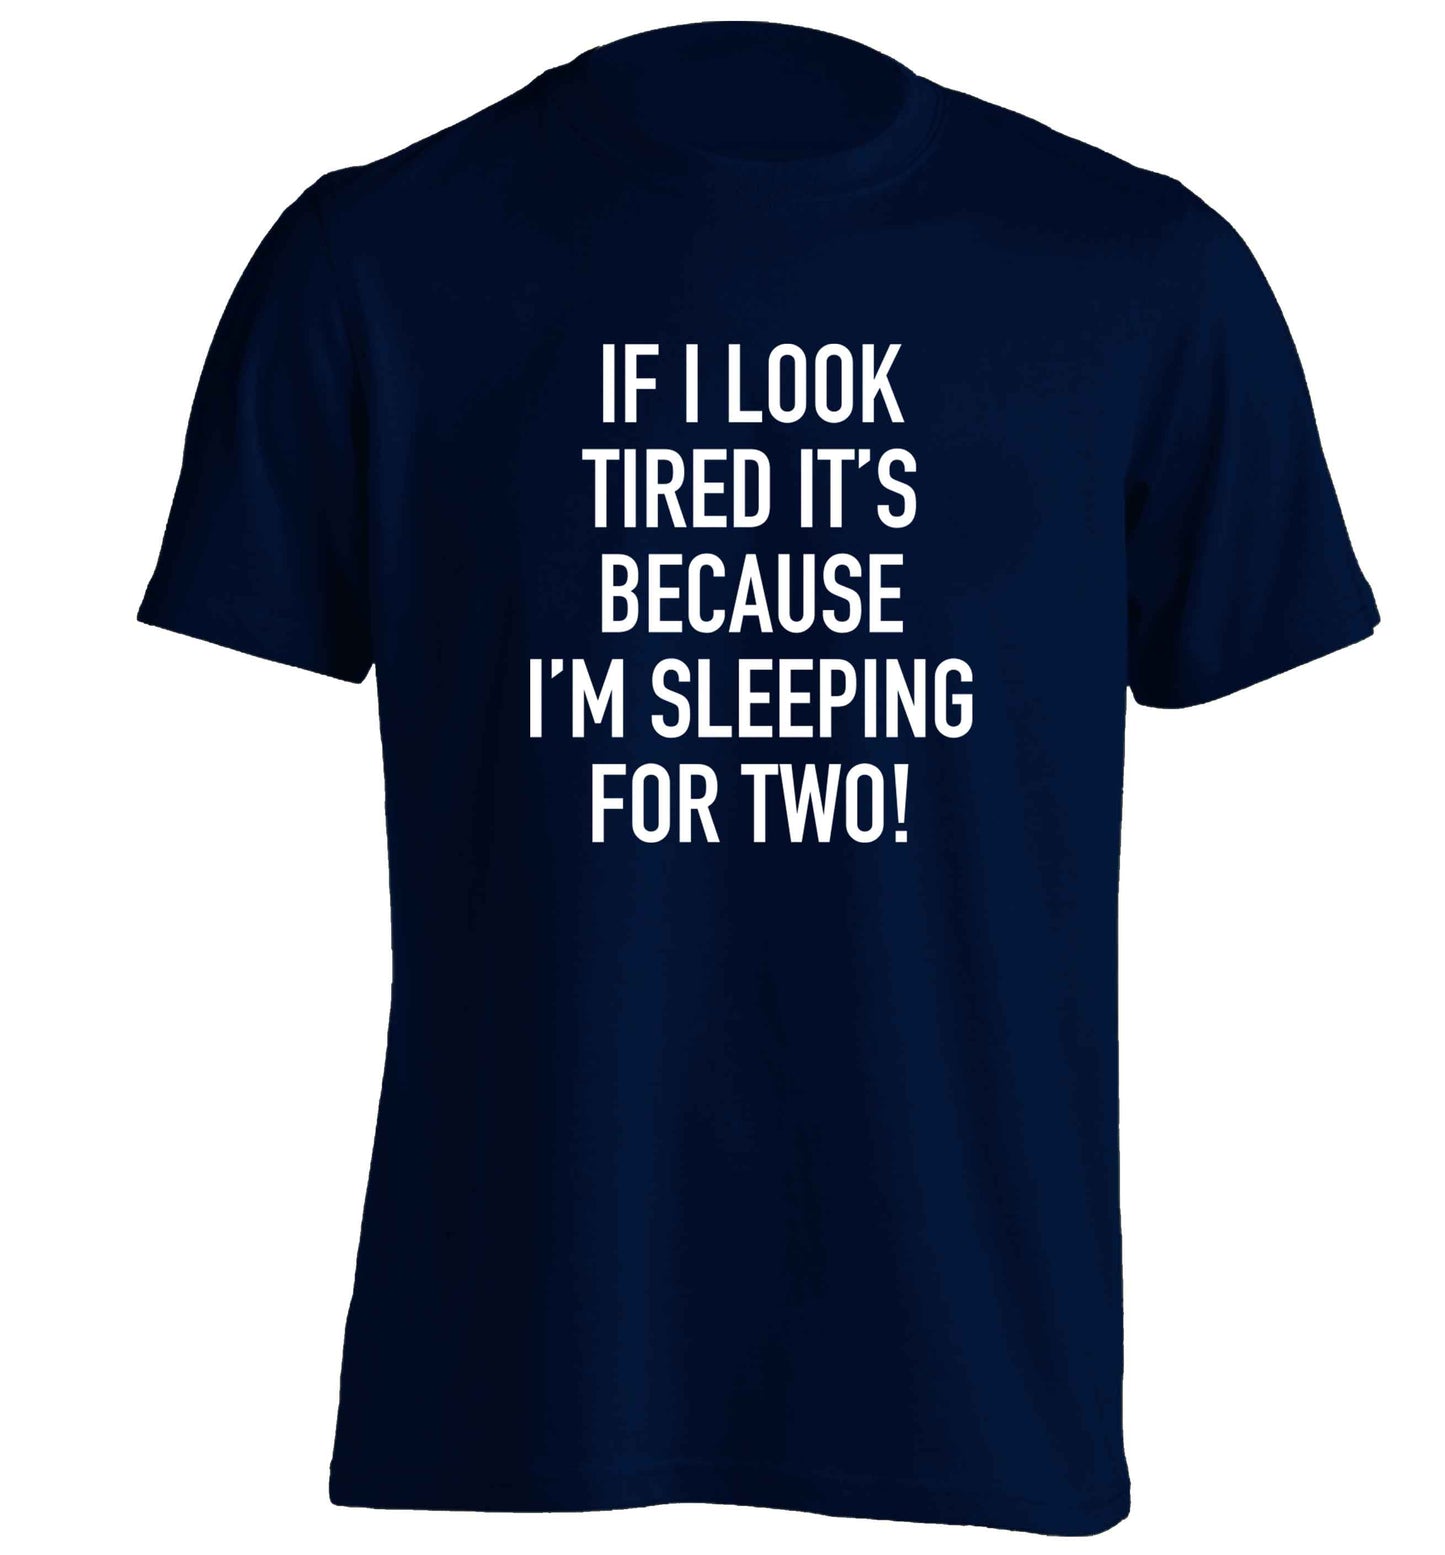 If I look tired it's because I'm sleeping for two adults unisex navy Tshirt 2XL